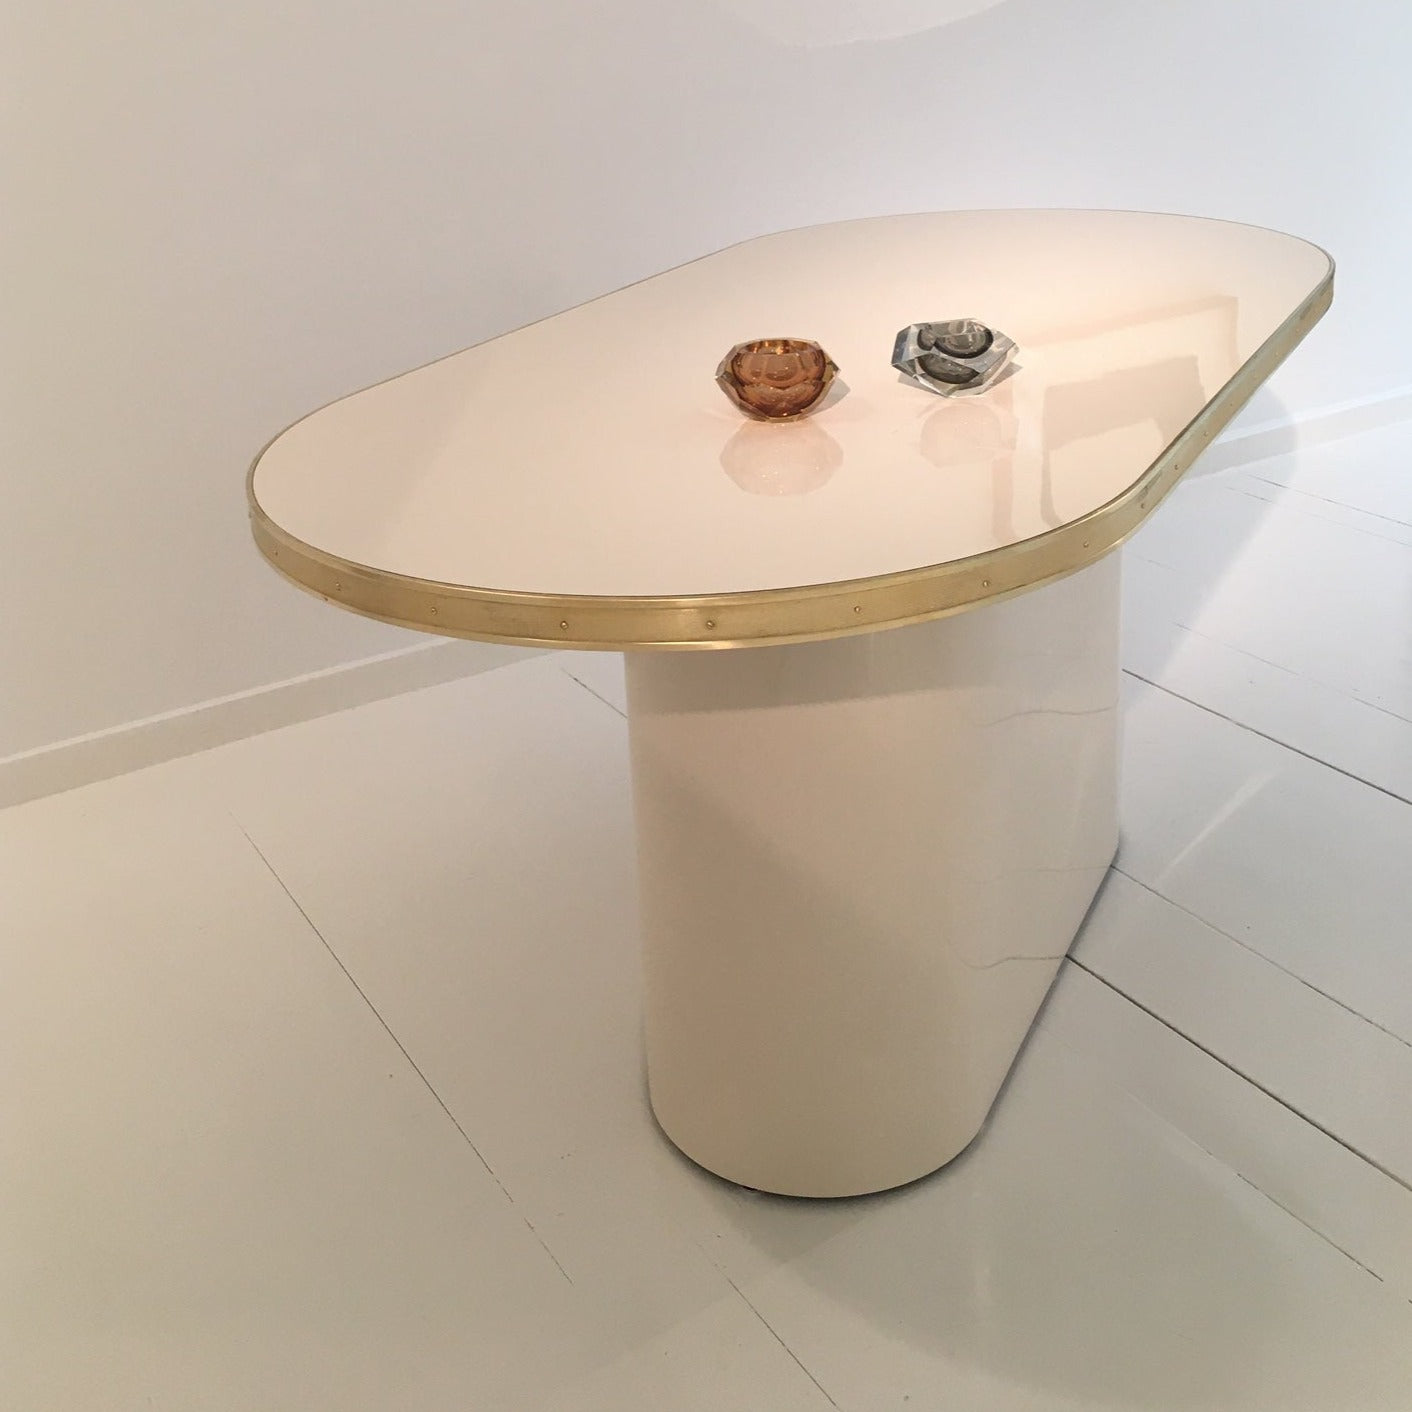 Julieta Console Table in High Gloss Laminate with Brass Details and Pedestal Leg